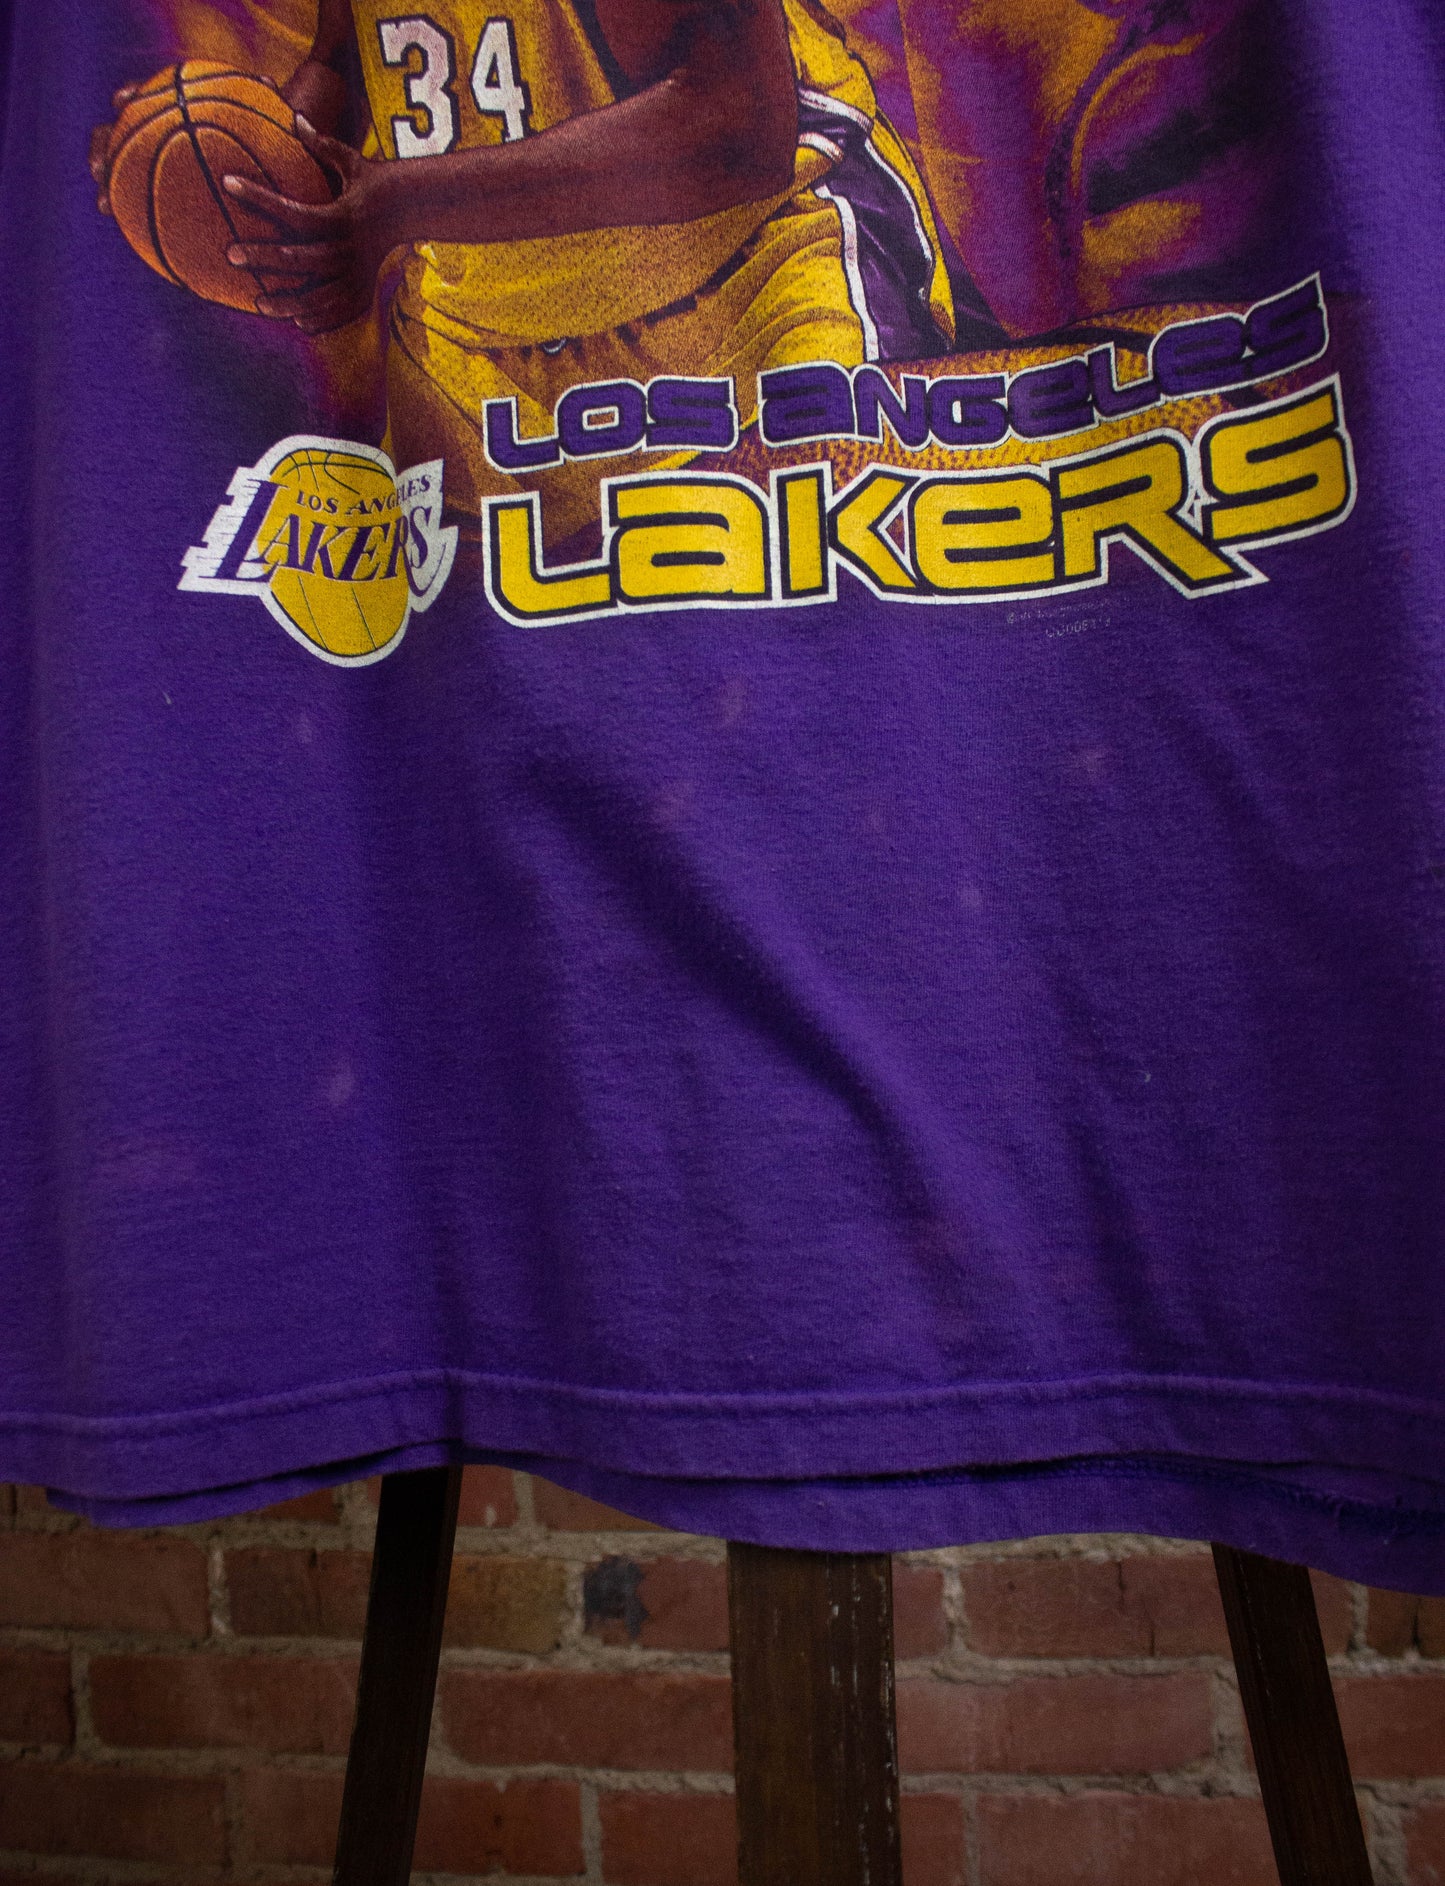 Vintage Shaquille O'Neal Los Angeles Lakers Graphic T Shirt 90s Purple XL